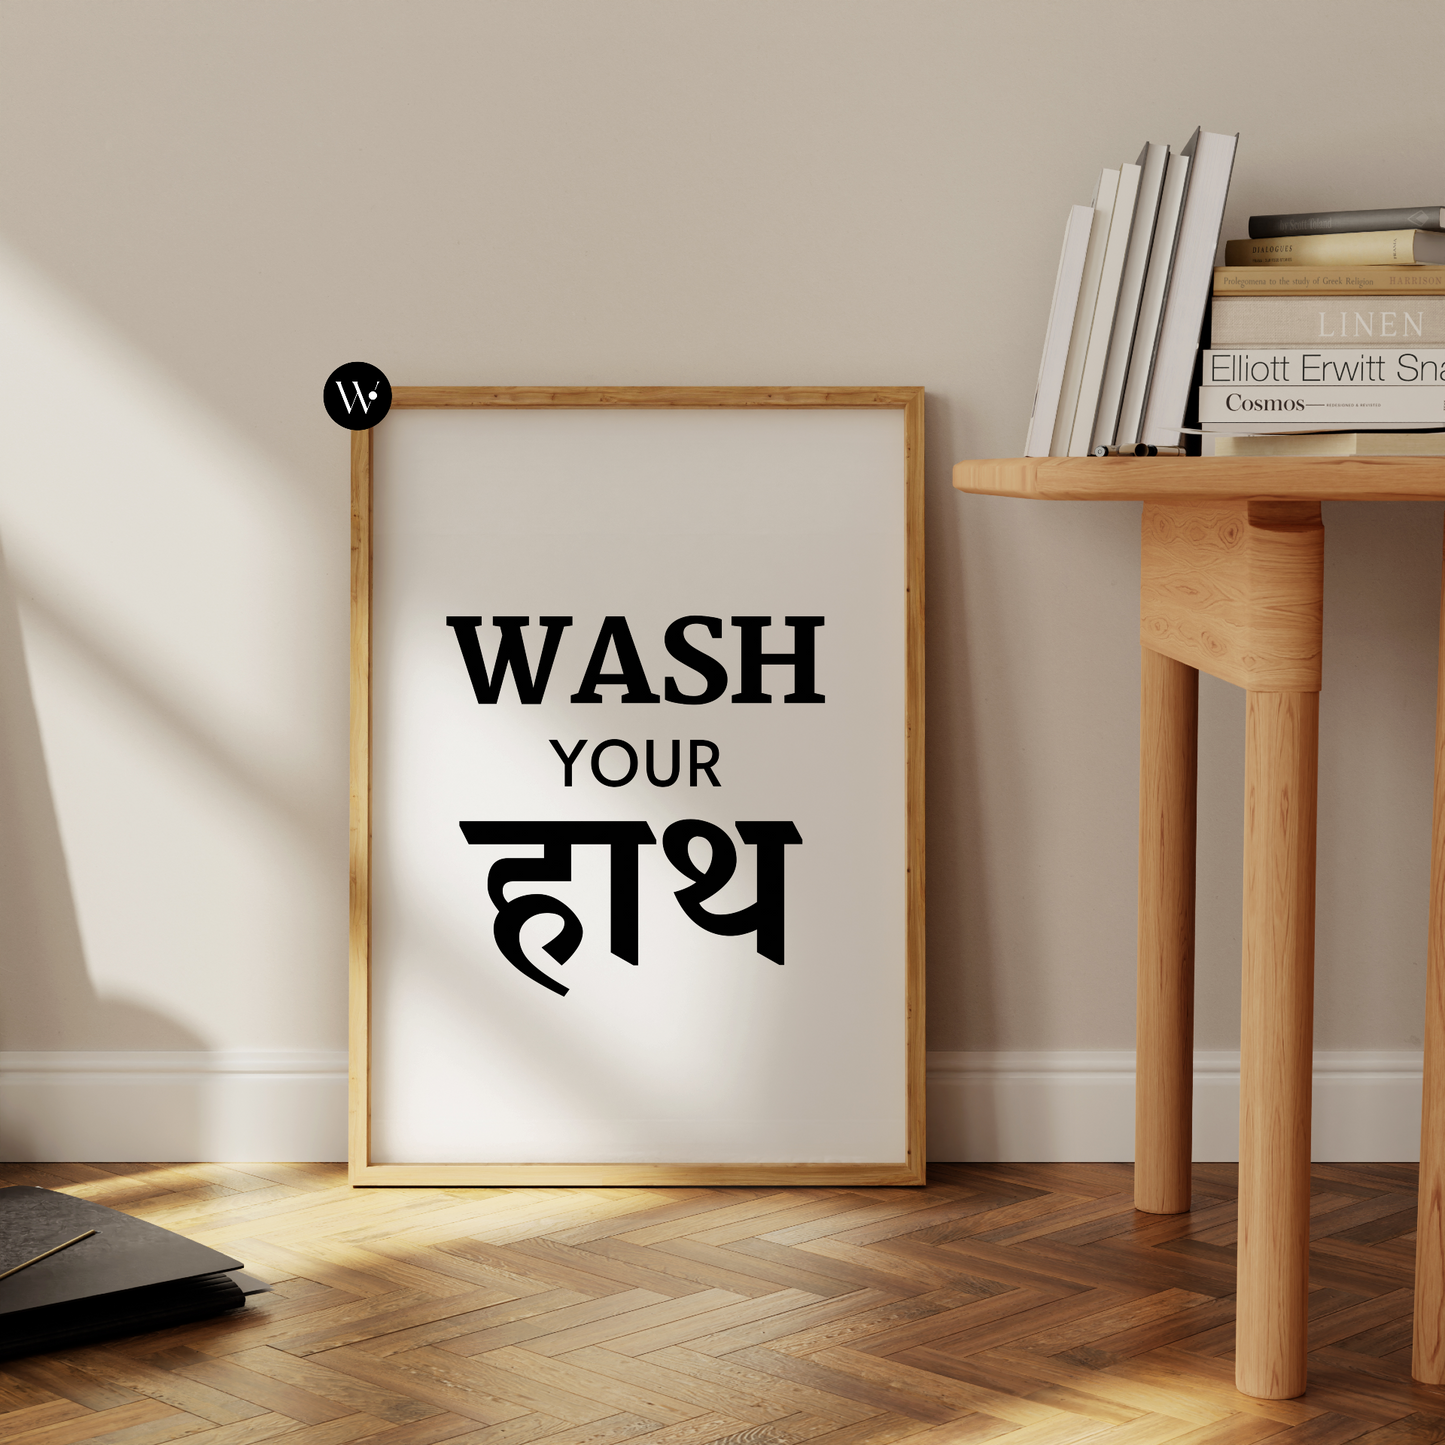 Wash Your Hands in Hindi Poster Print